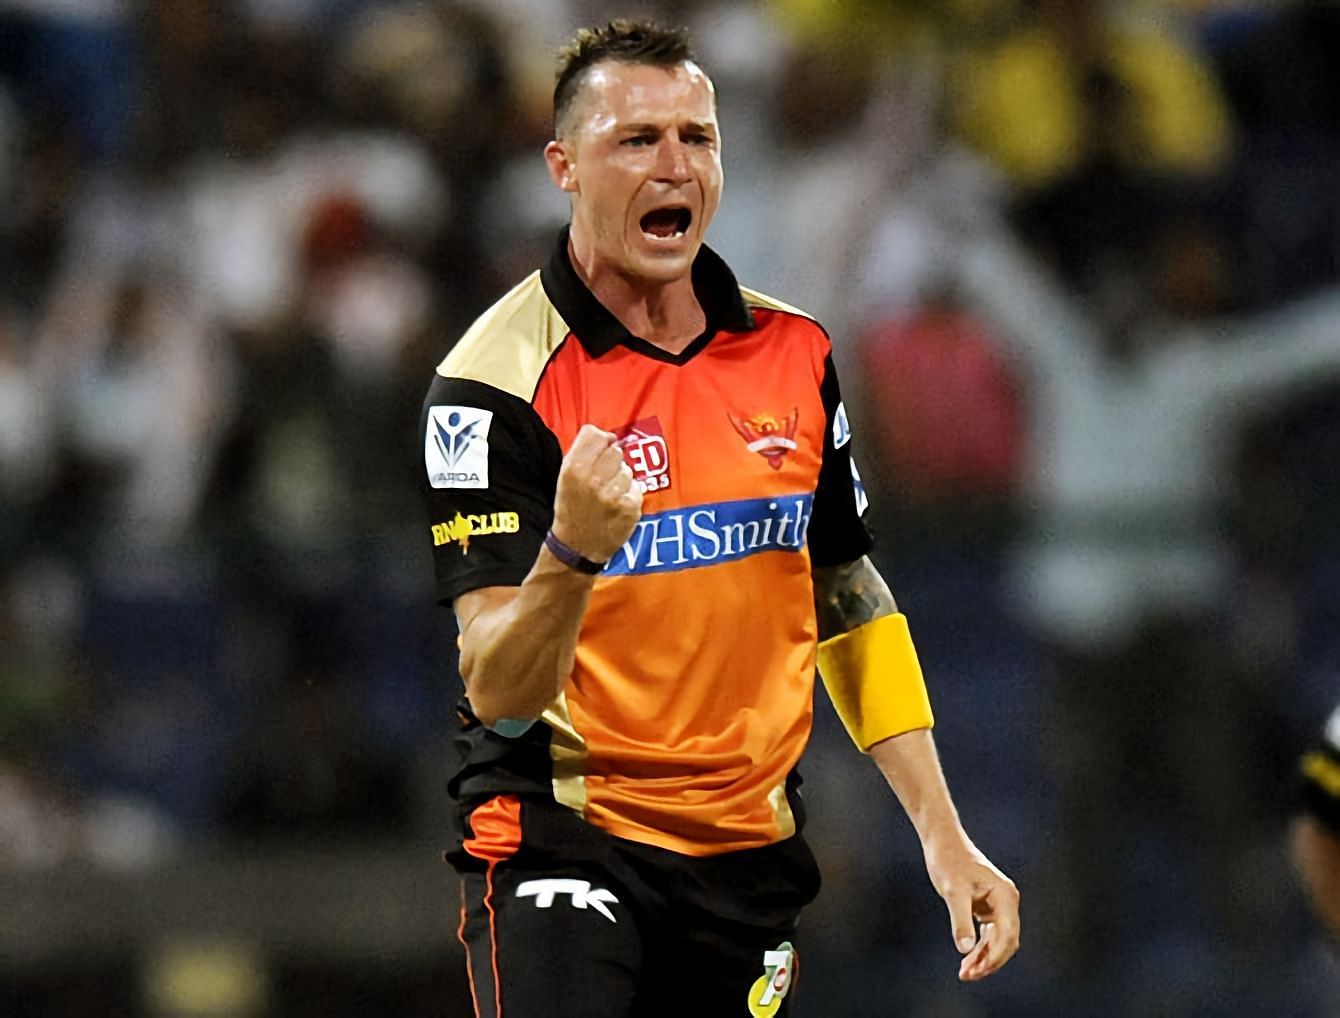 IPL 2022: Dale Steyn takes SEPCIAL yorker session with T Natarajan & Co at SRH practice - Watch video